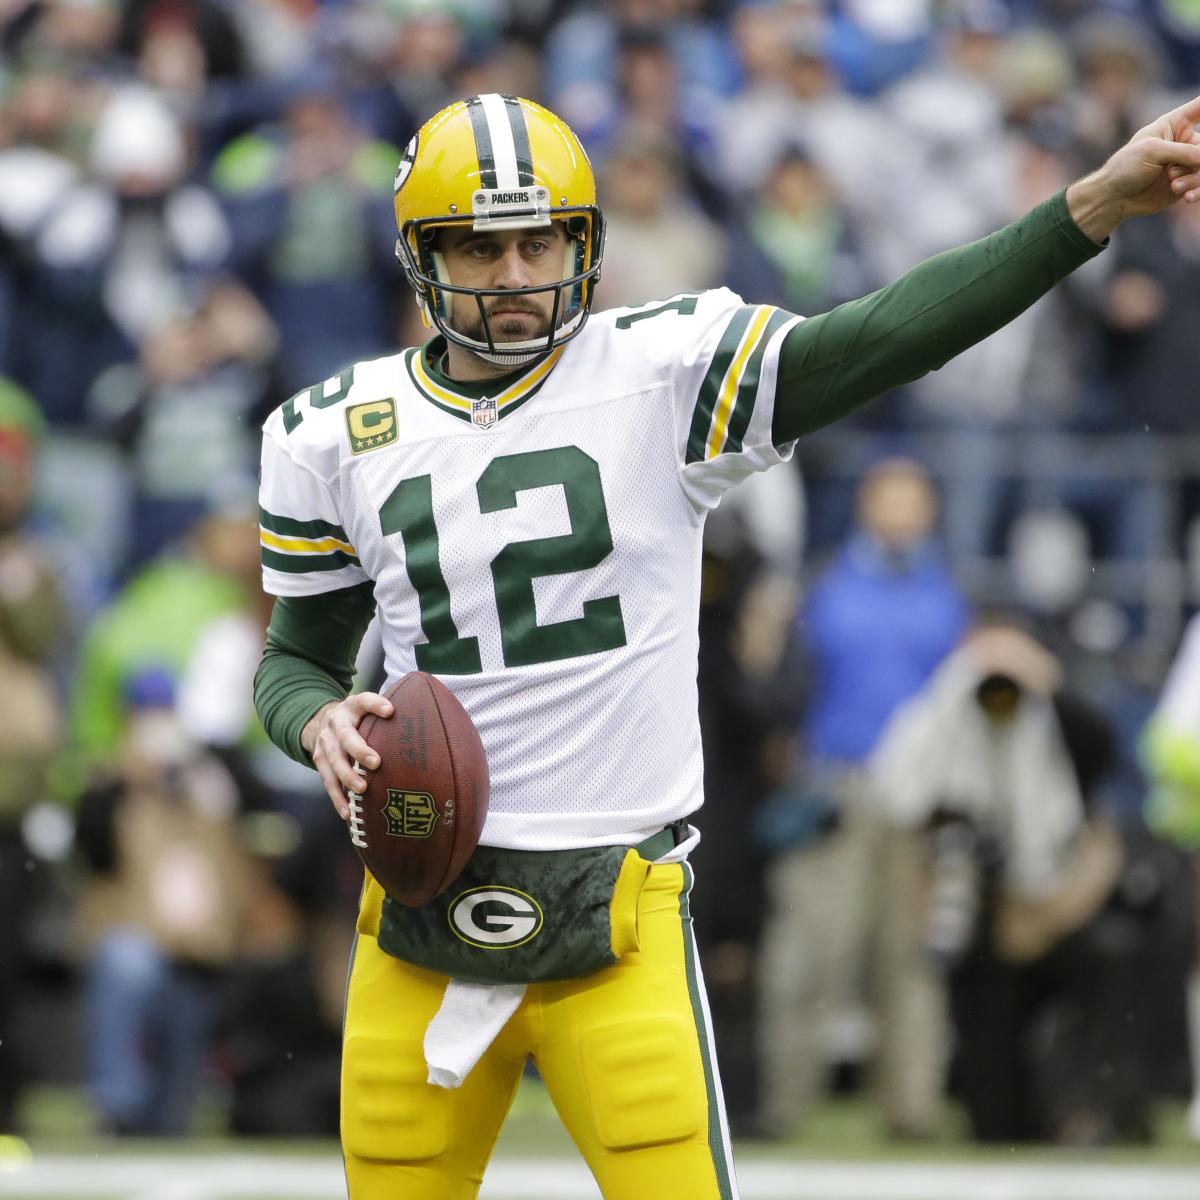 Fantasy Football 2015: QB Rankings, Projections and Top Team Names